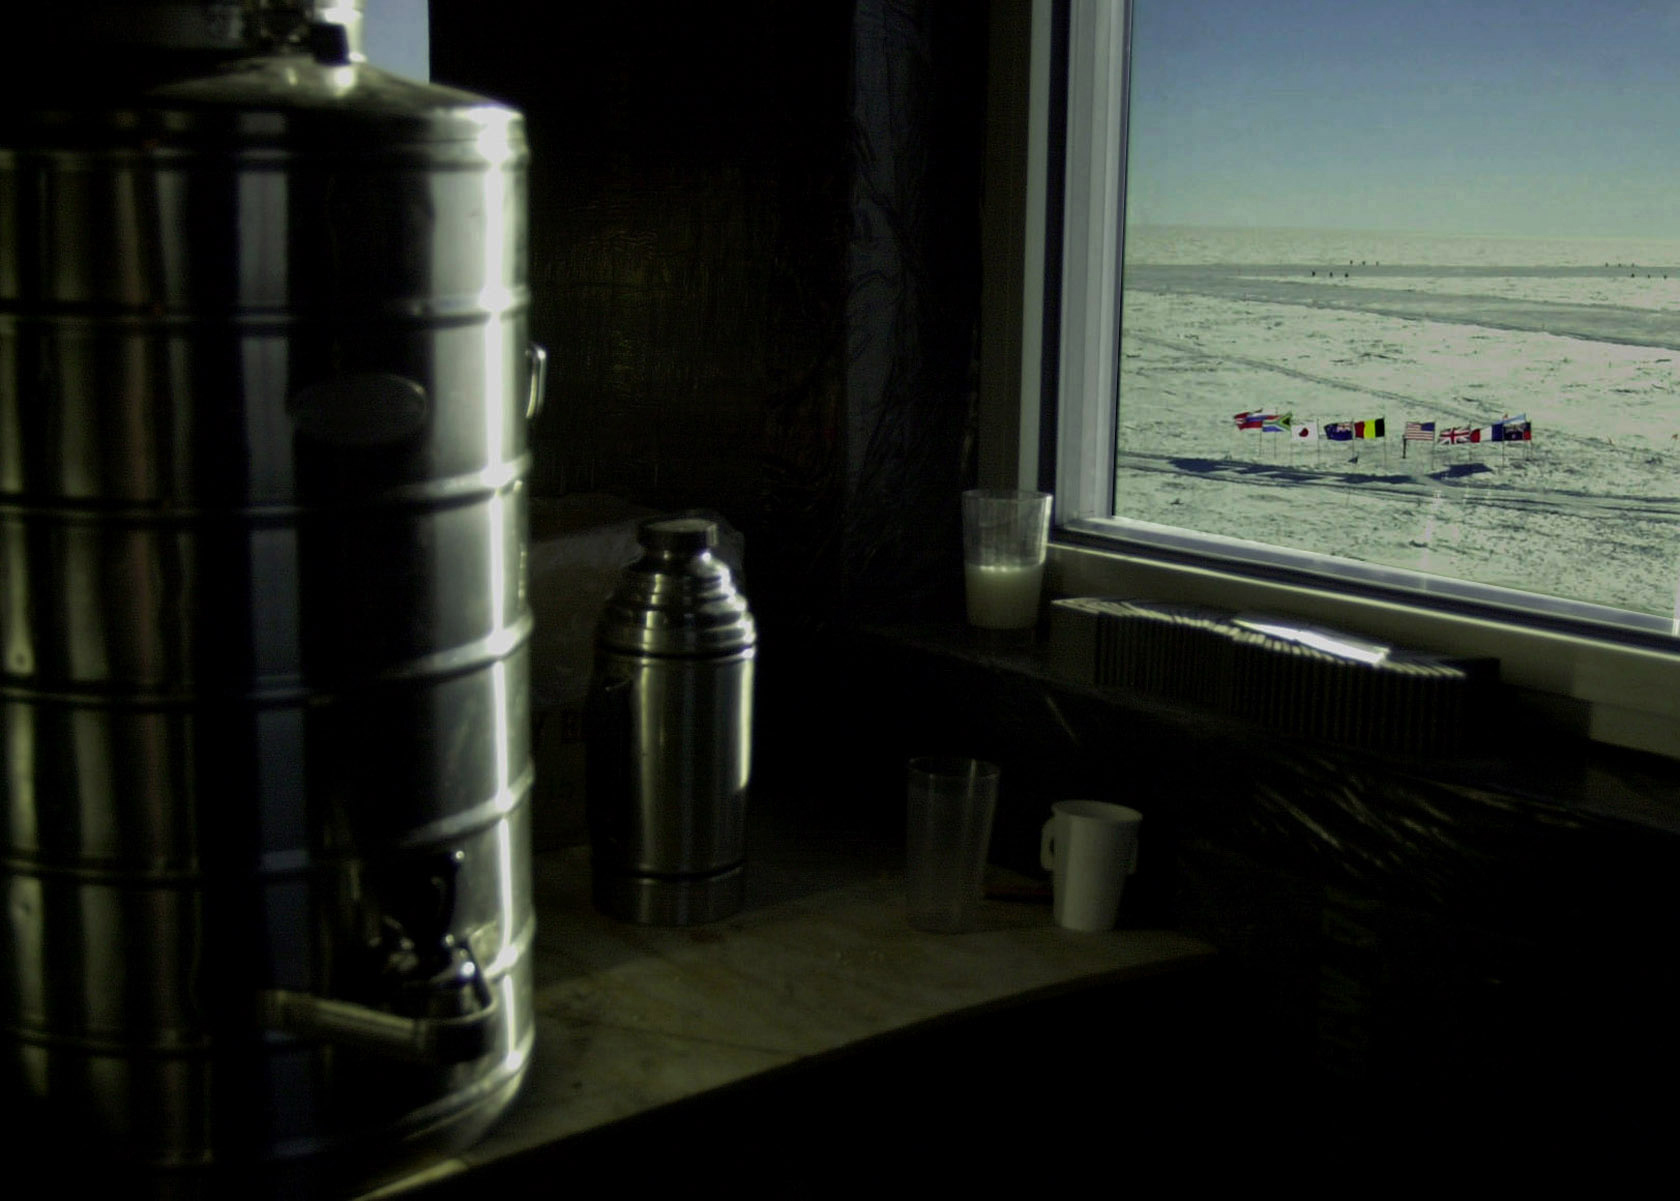 Interior shot of coffee thermos near window with view out the window of many national flags fluttering in the wind.  The distant landscape is white snow.